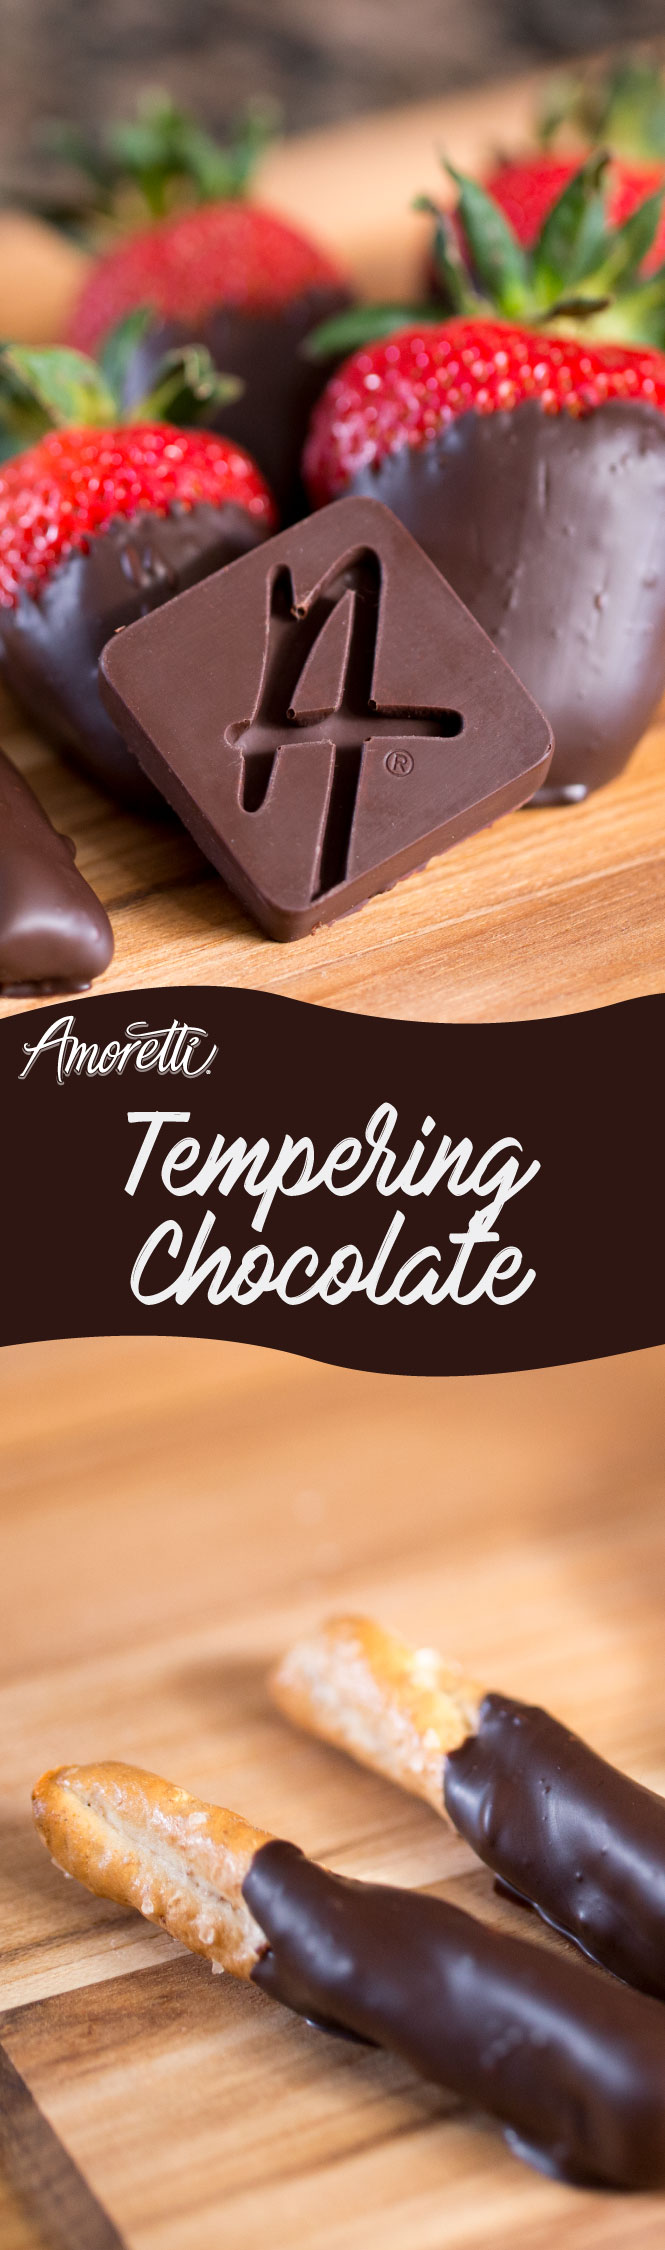 Learn to temper chocolate like a professional!